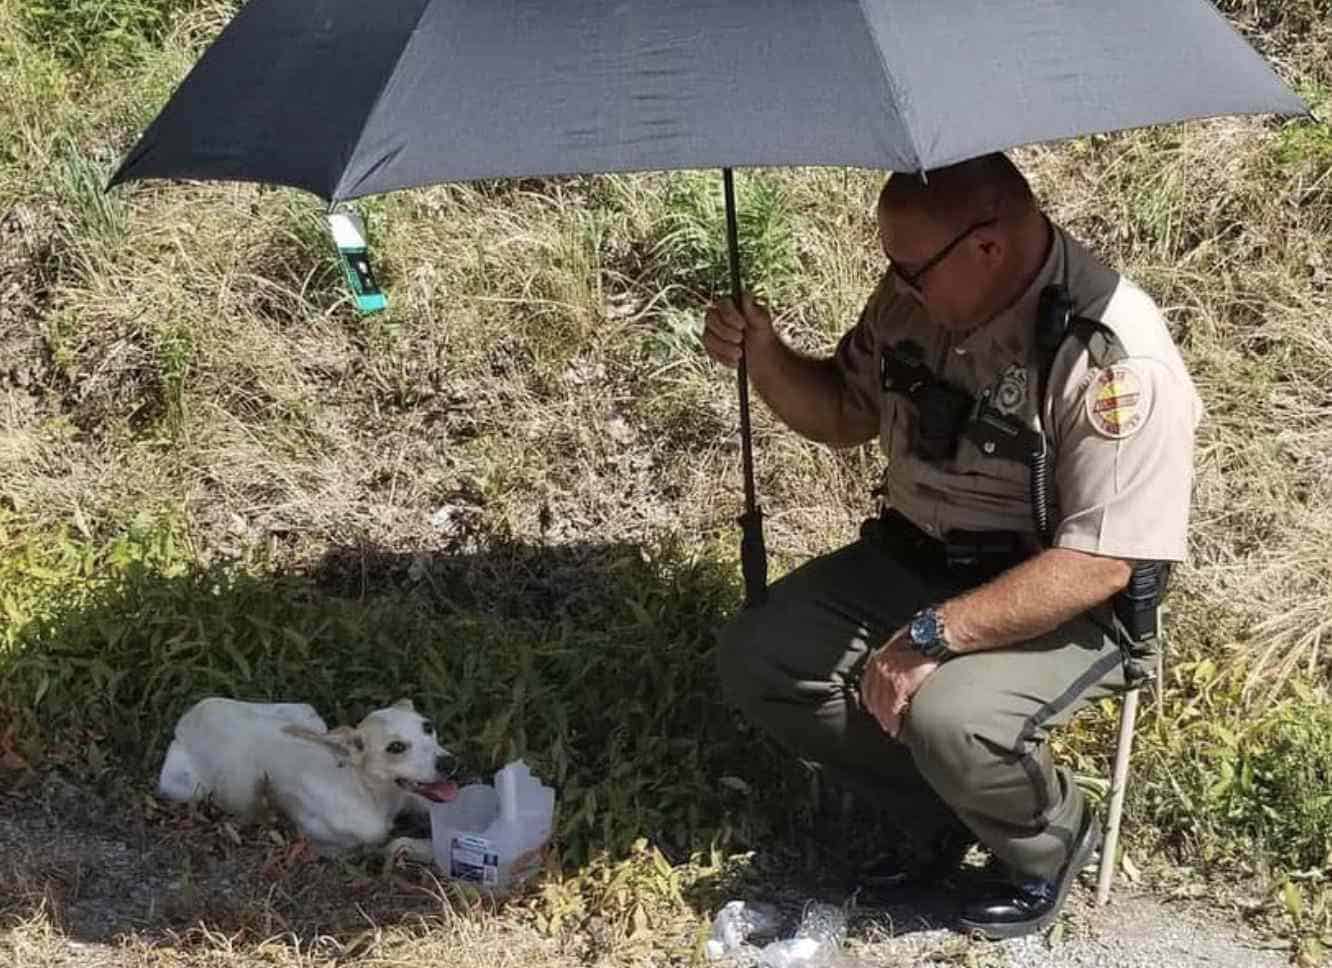 police officer protects dog with umbrella